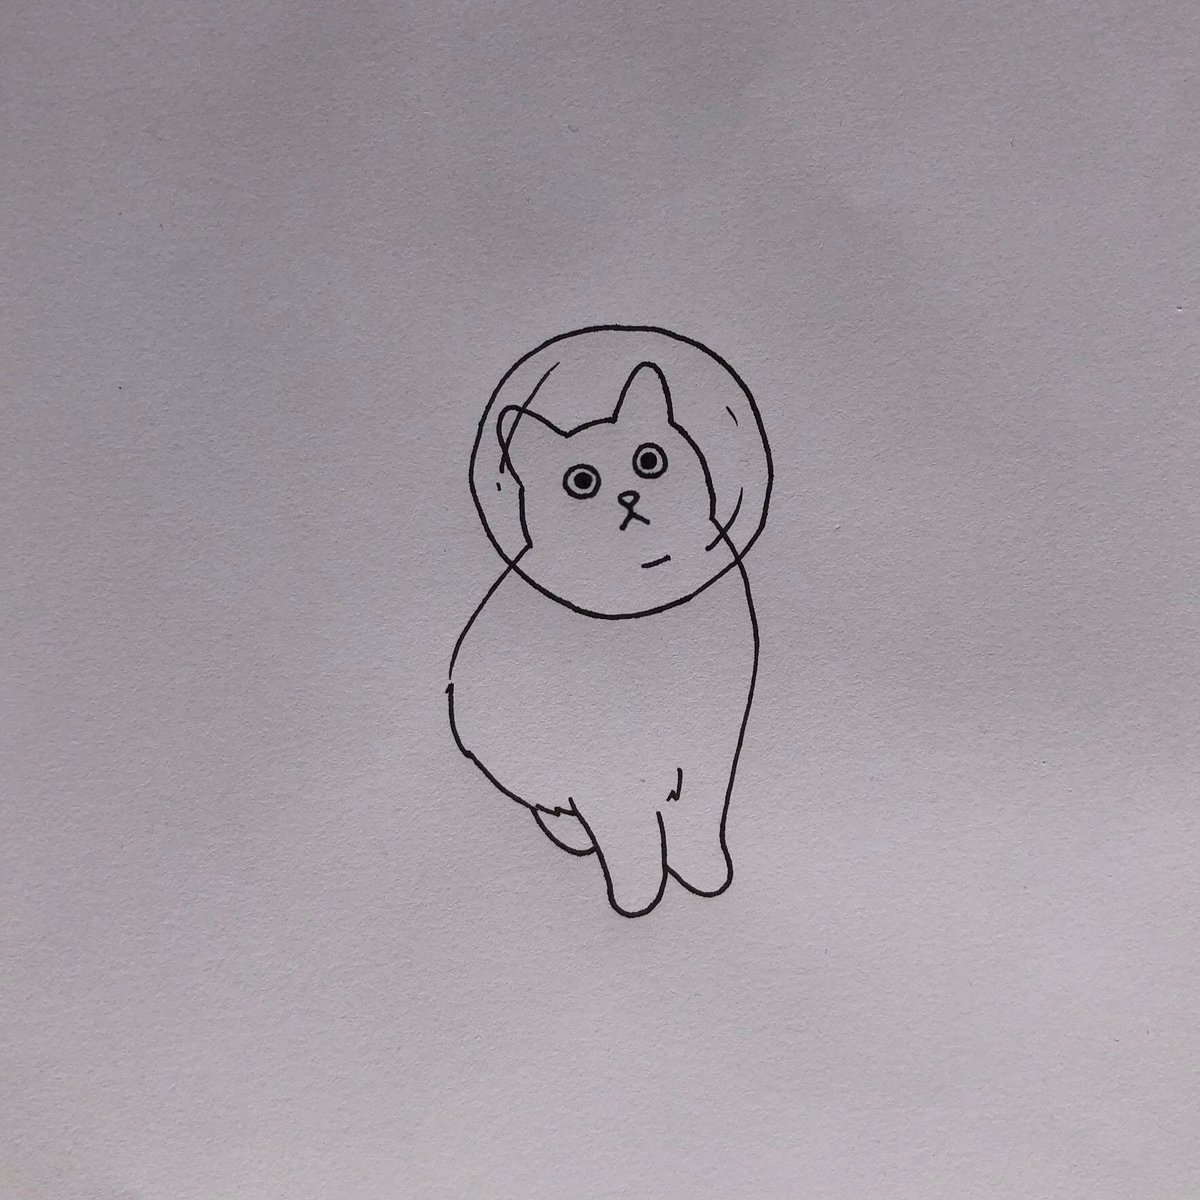 poorly drawn cats (@poorlycatdraw) on Twitter photo 2020-09-23 16:55:38